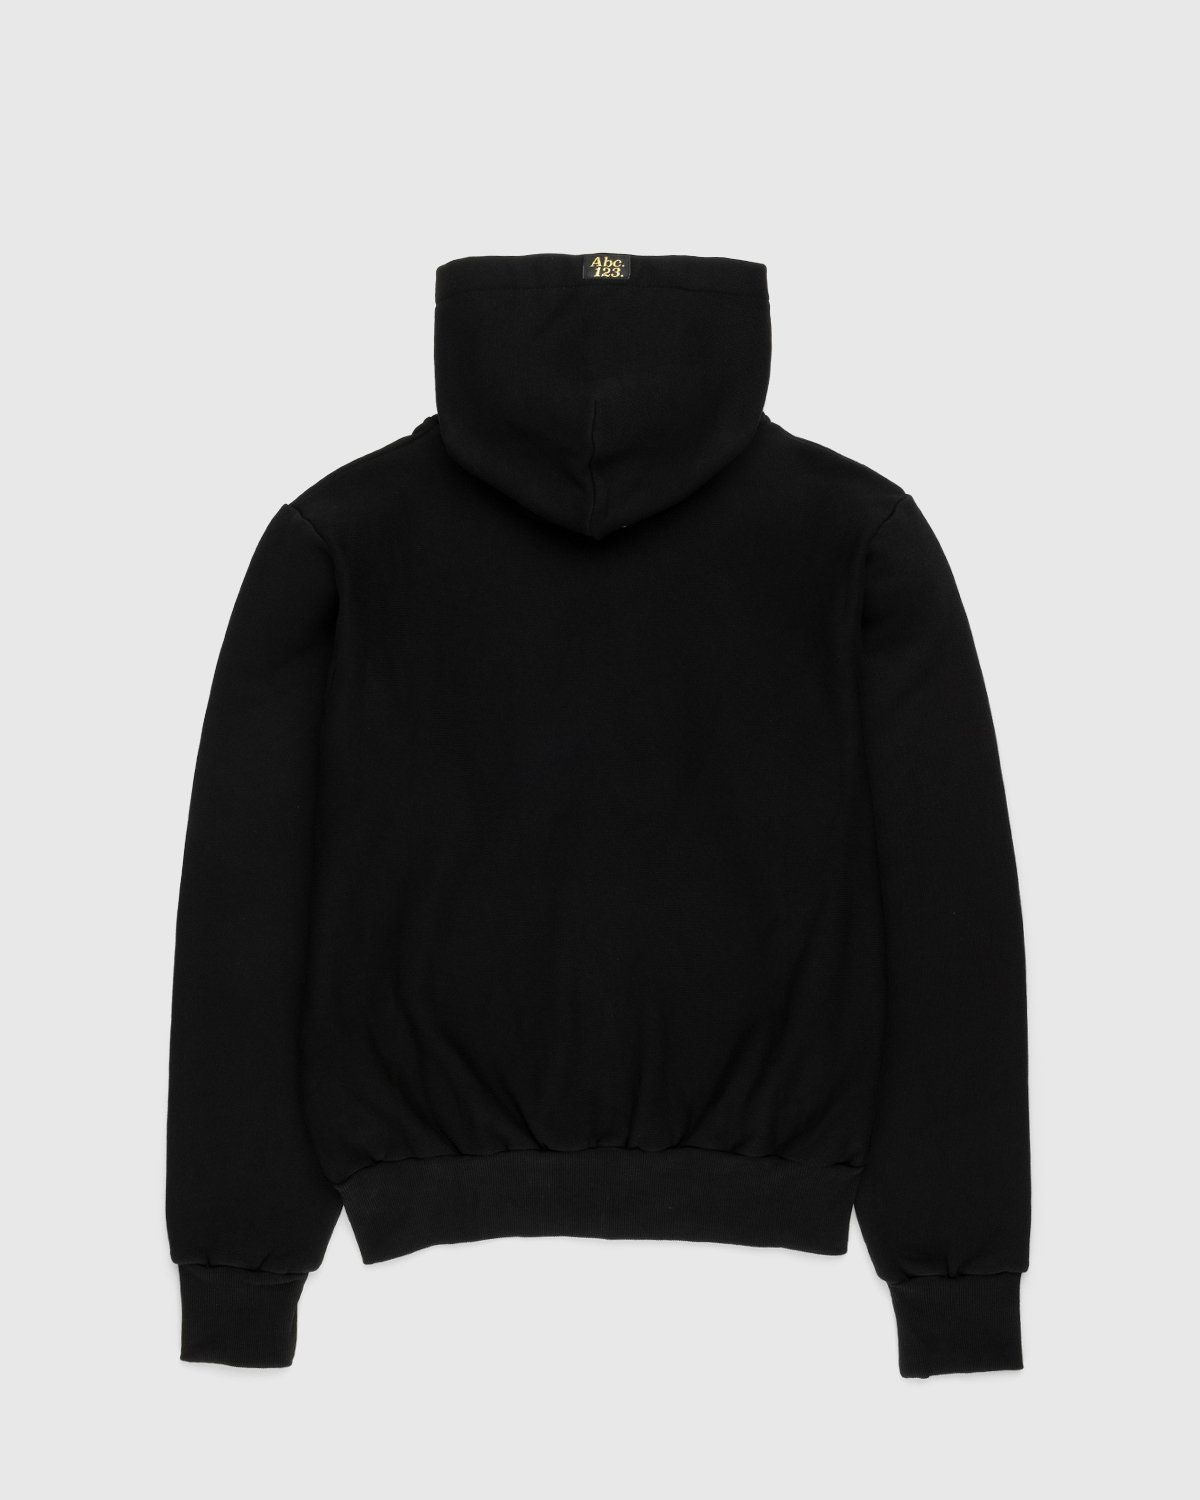 Abc. – Zip-Up French Terry Hoodie Anthracite - Sweats - Black - Image 2